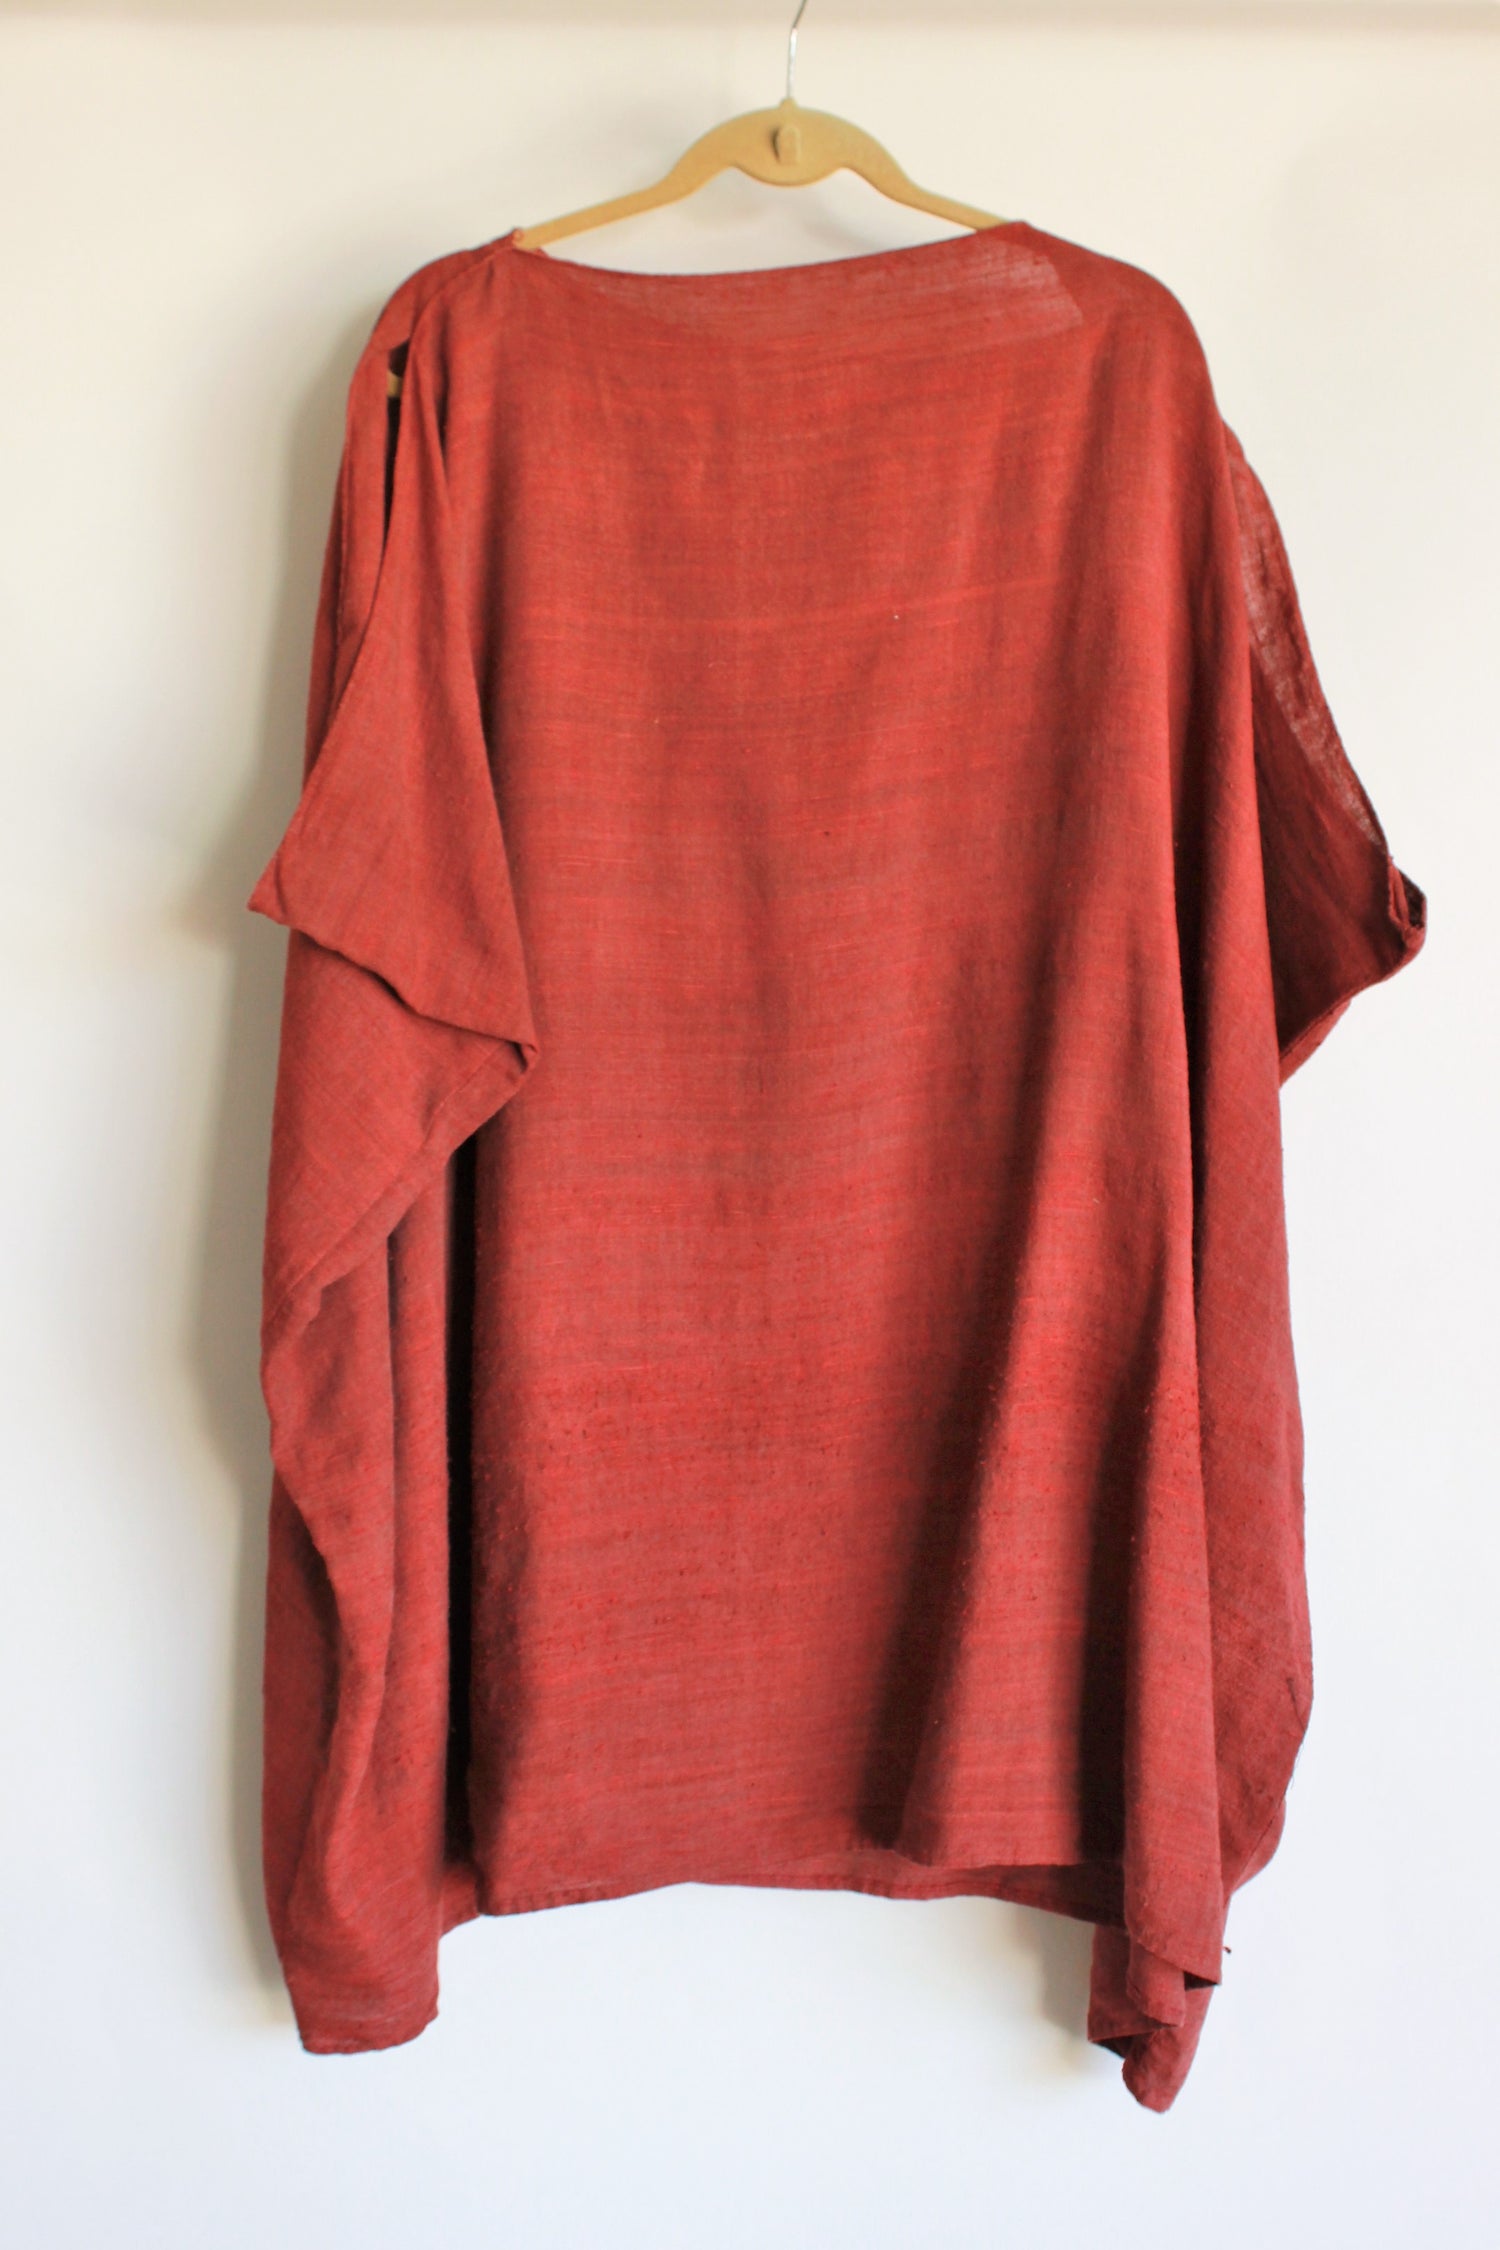 Vintage 1940s Roman Style Tunic in Red